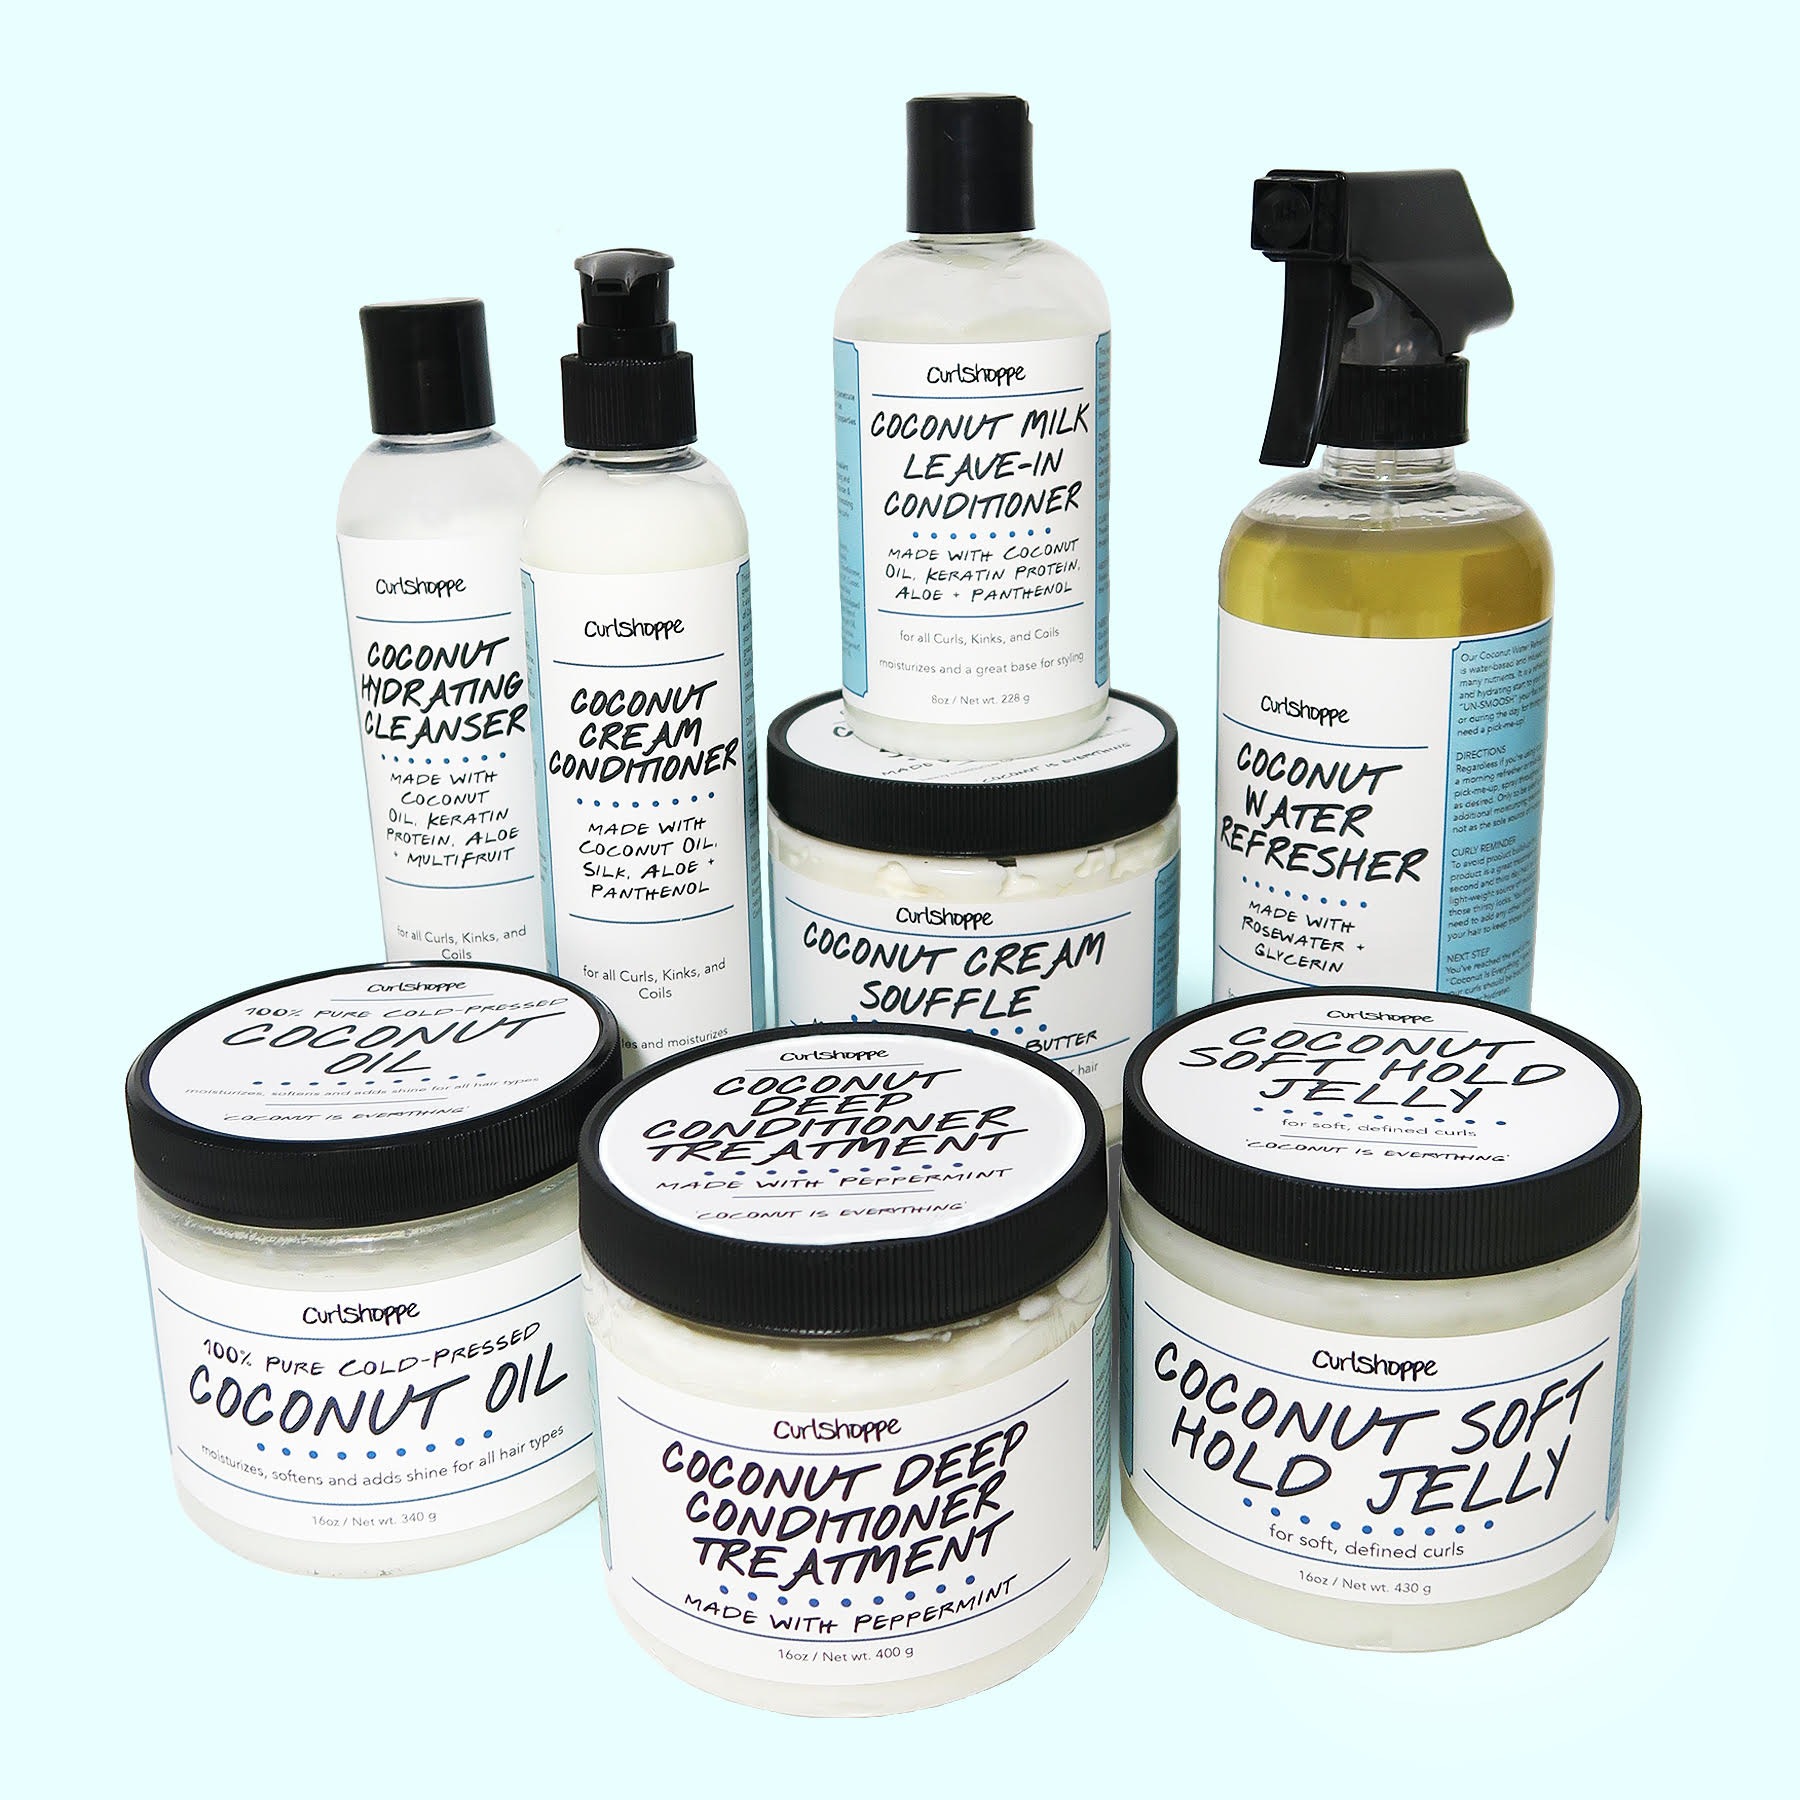 CurlShoppe boosts curls and simplifies your natural hair care routine